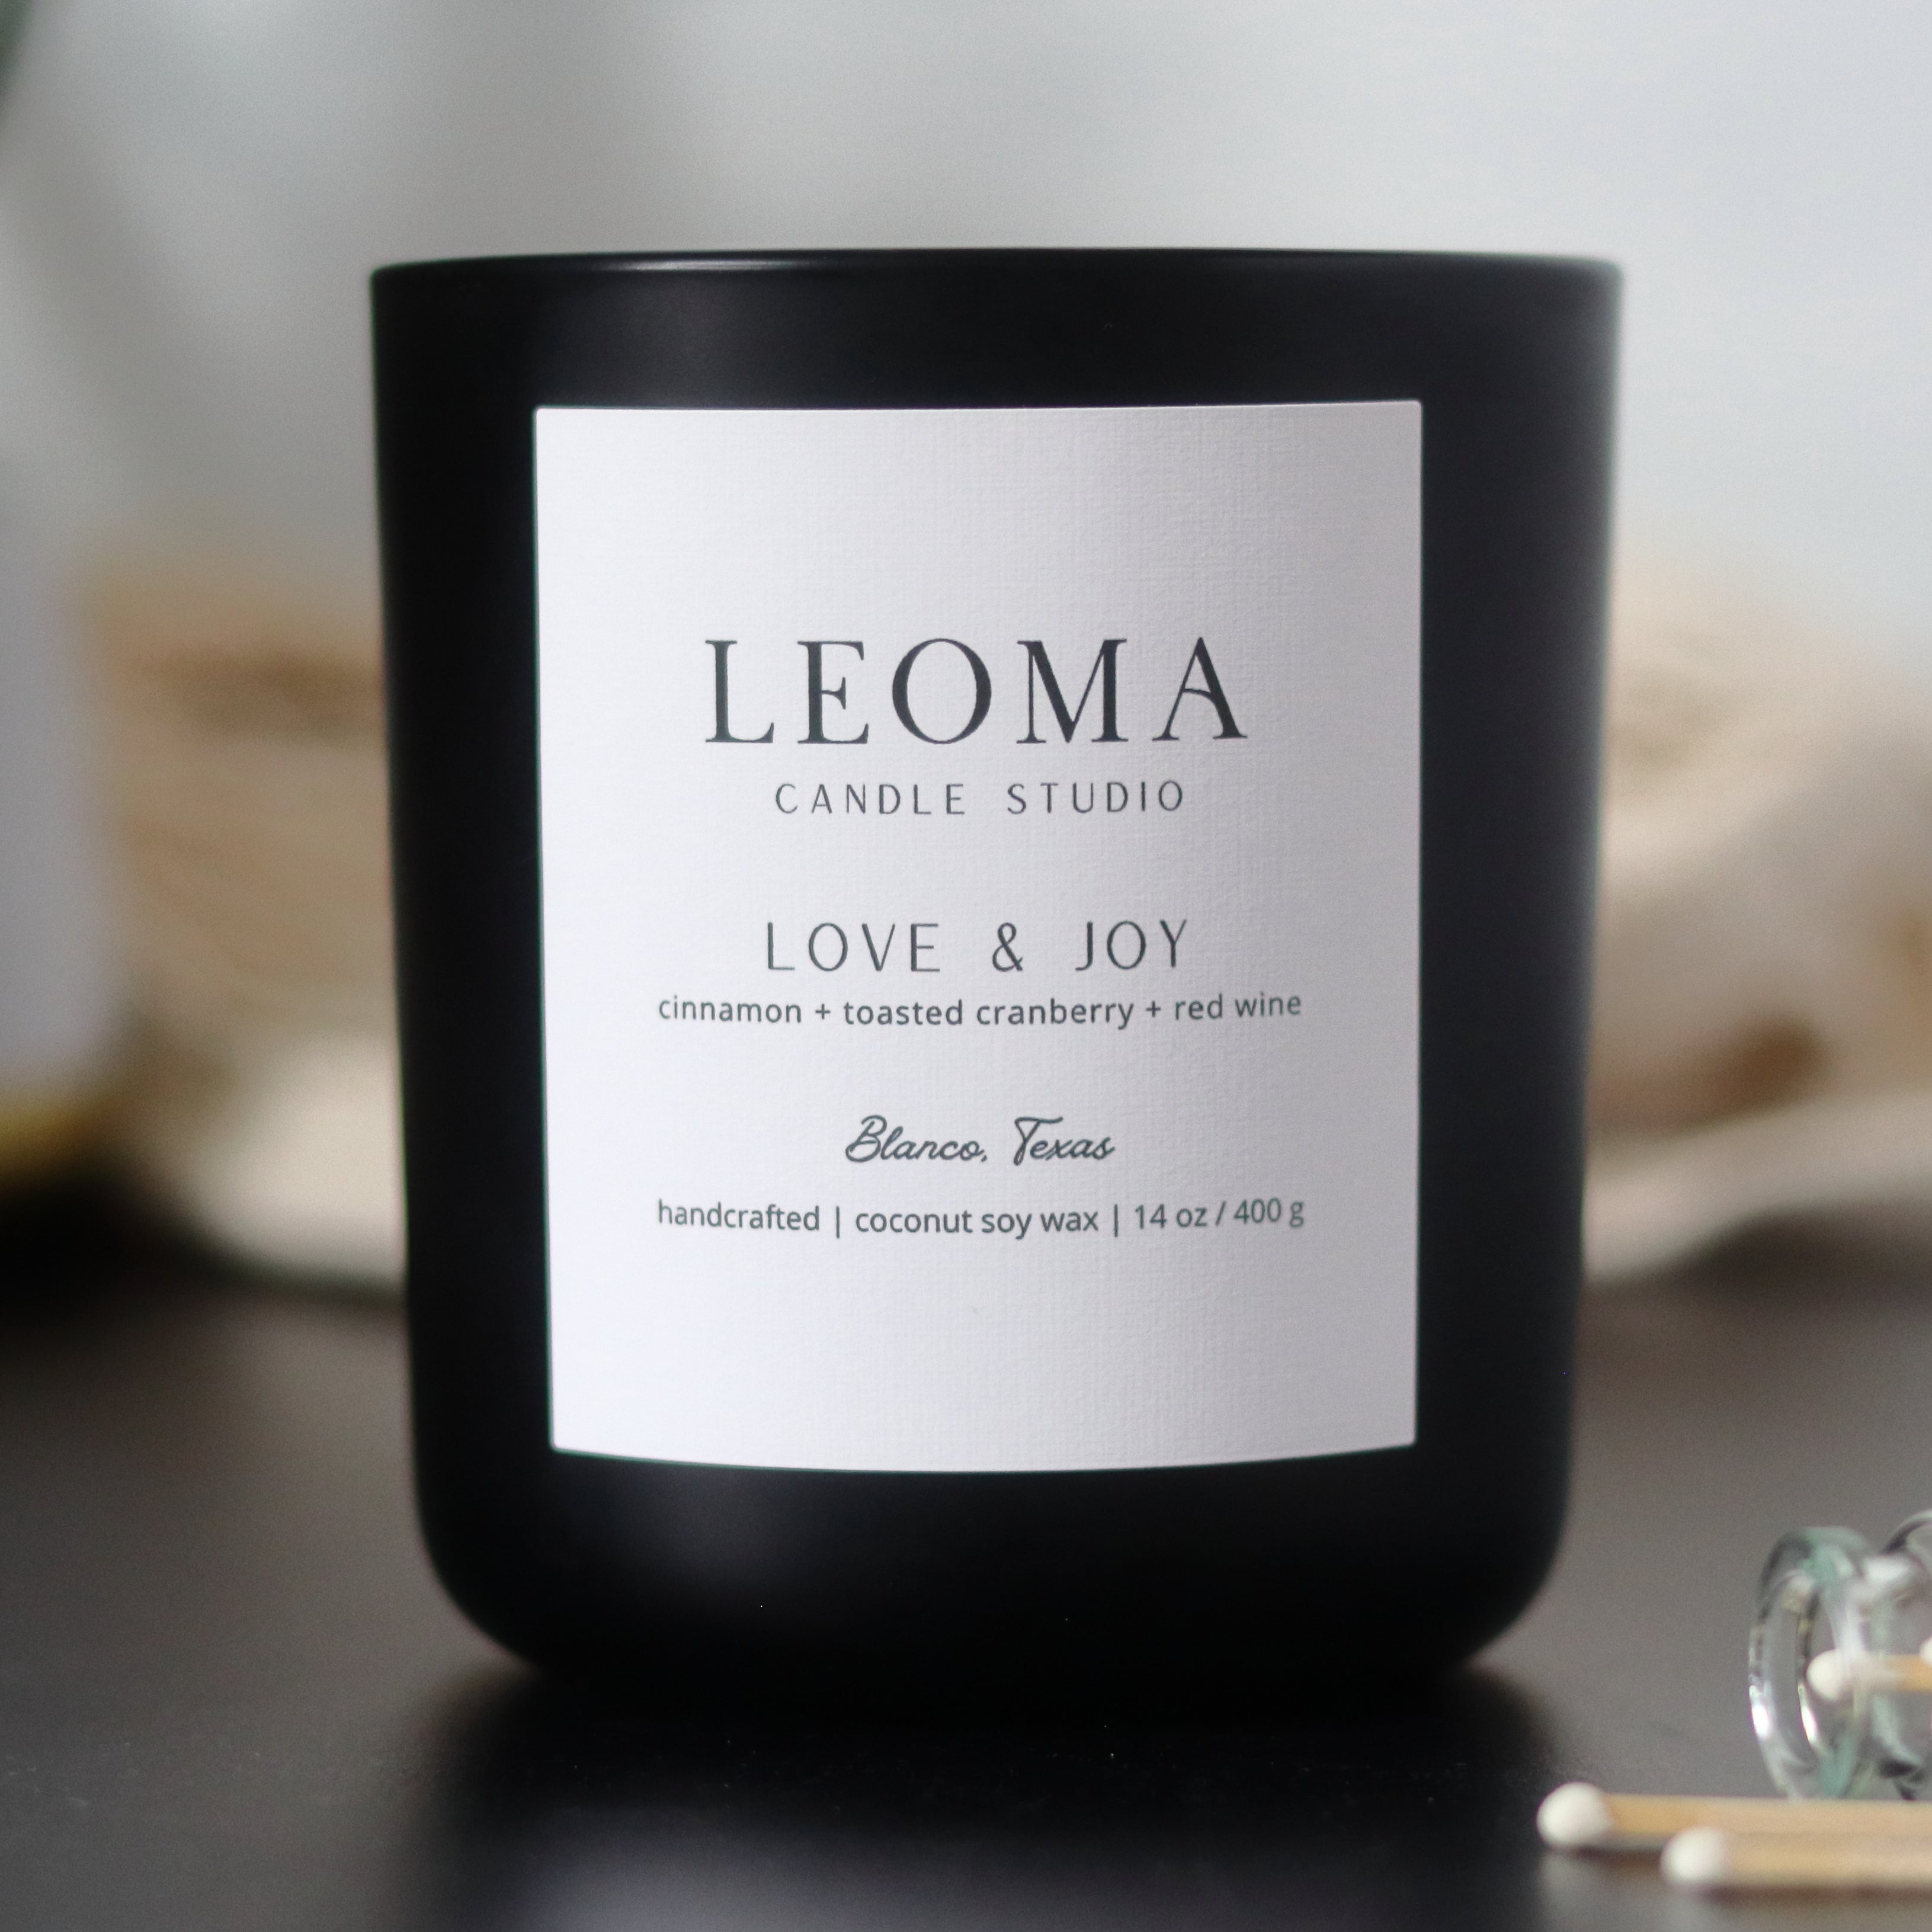 Handcrafted eco-friendly scented candle. Natural coconut & soy wax, toxin-free, 100% cotton wicks. Black vessel. Love & Joy scent.